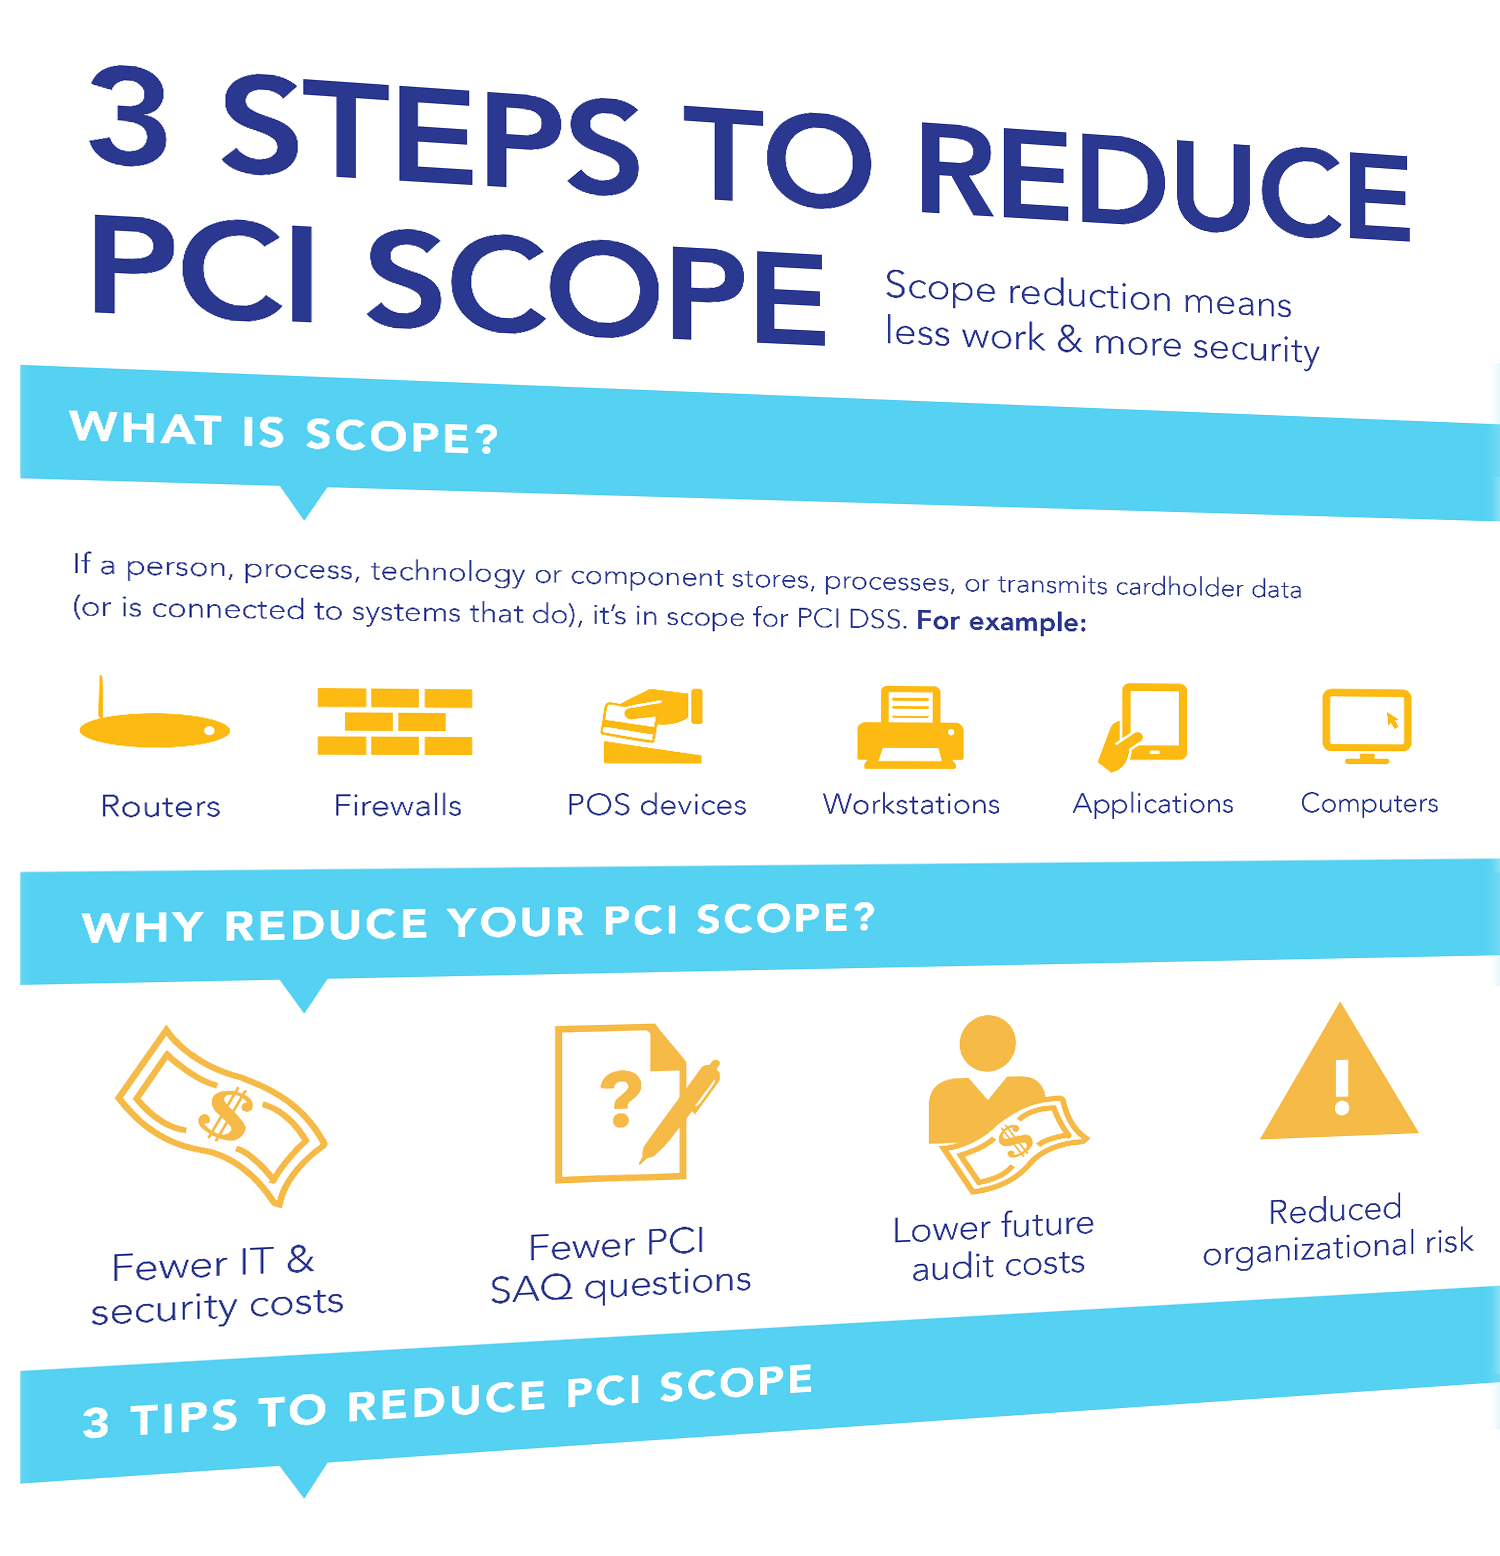 3 Steps to Reduce PCI Scope